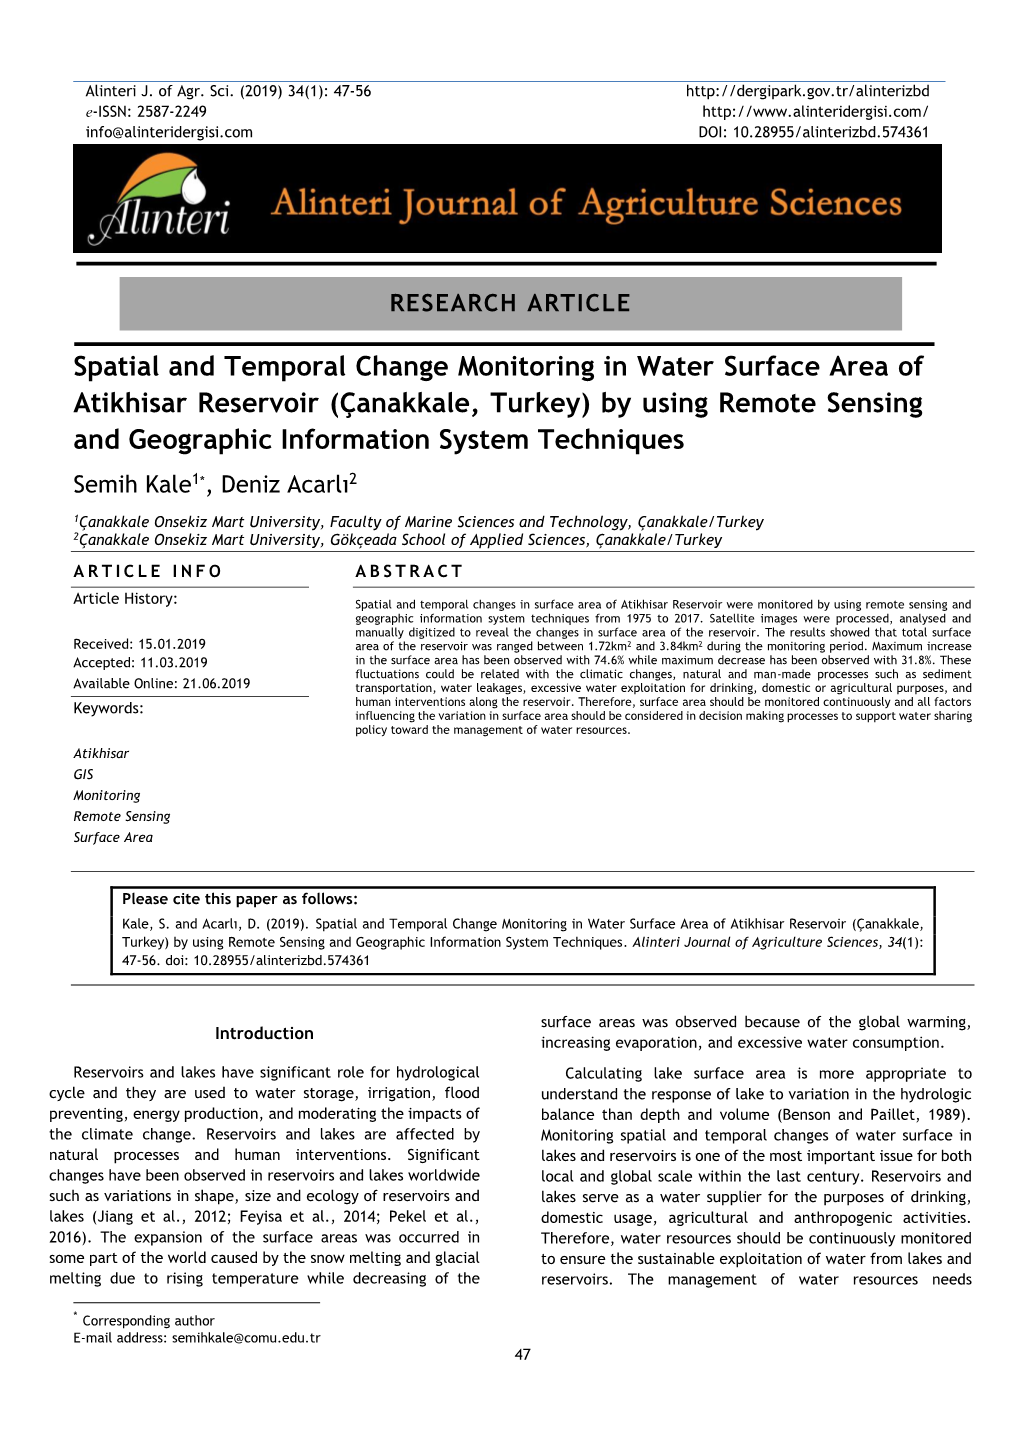 By Using Remote Sensing and Geographic Information System Techniques Semih Kale1*, Deniz Acarlı2